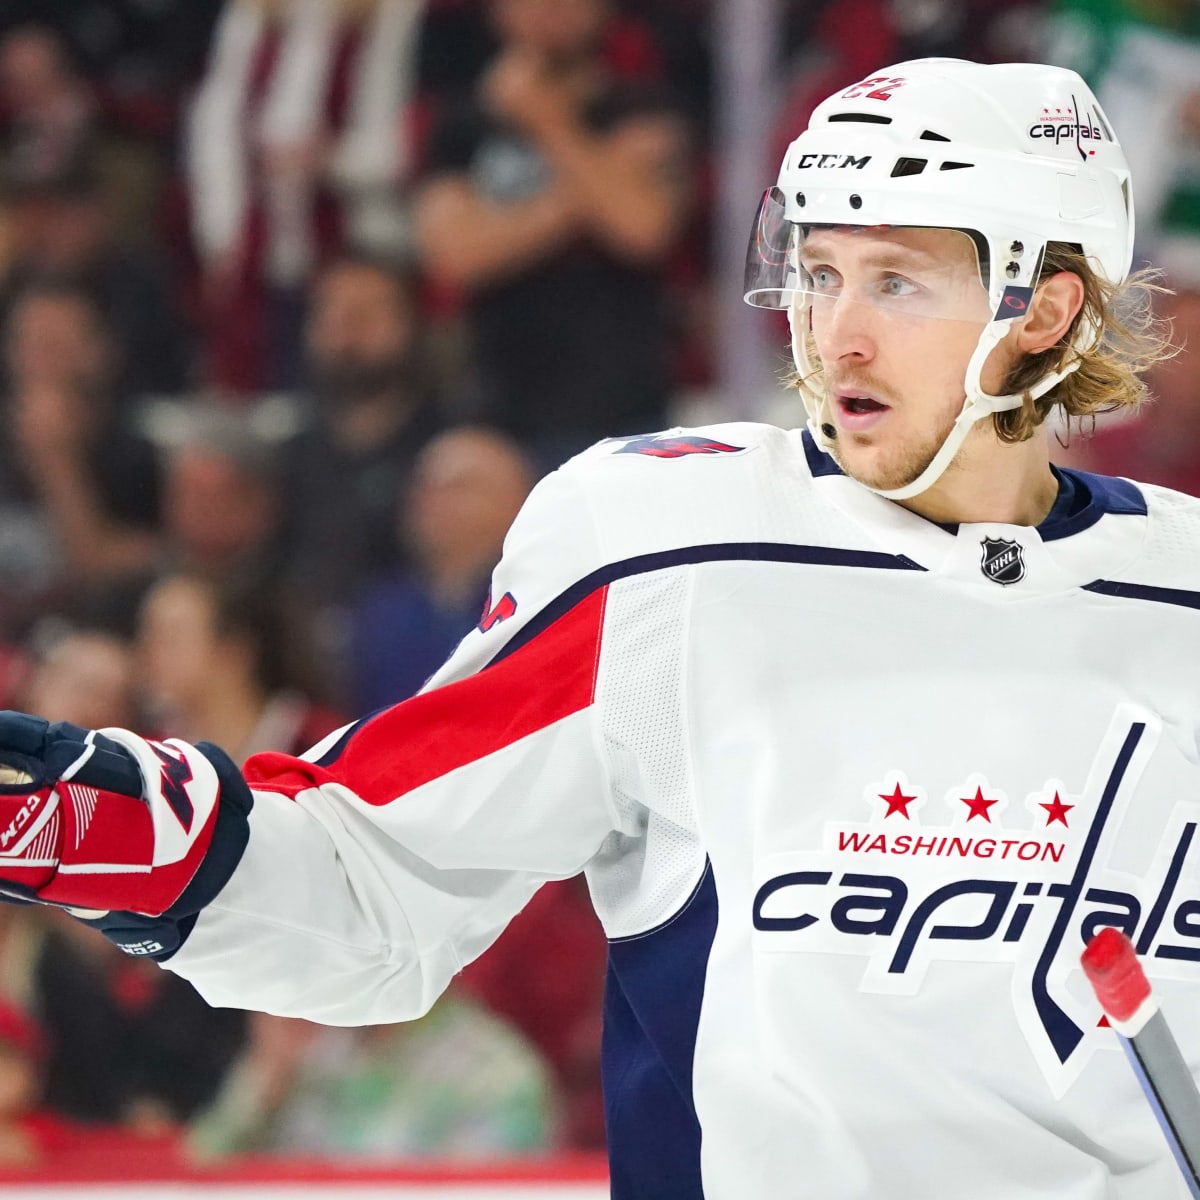 Carl Hagelin announces retirement from NHL due to 'severe' eye injury